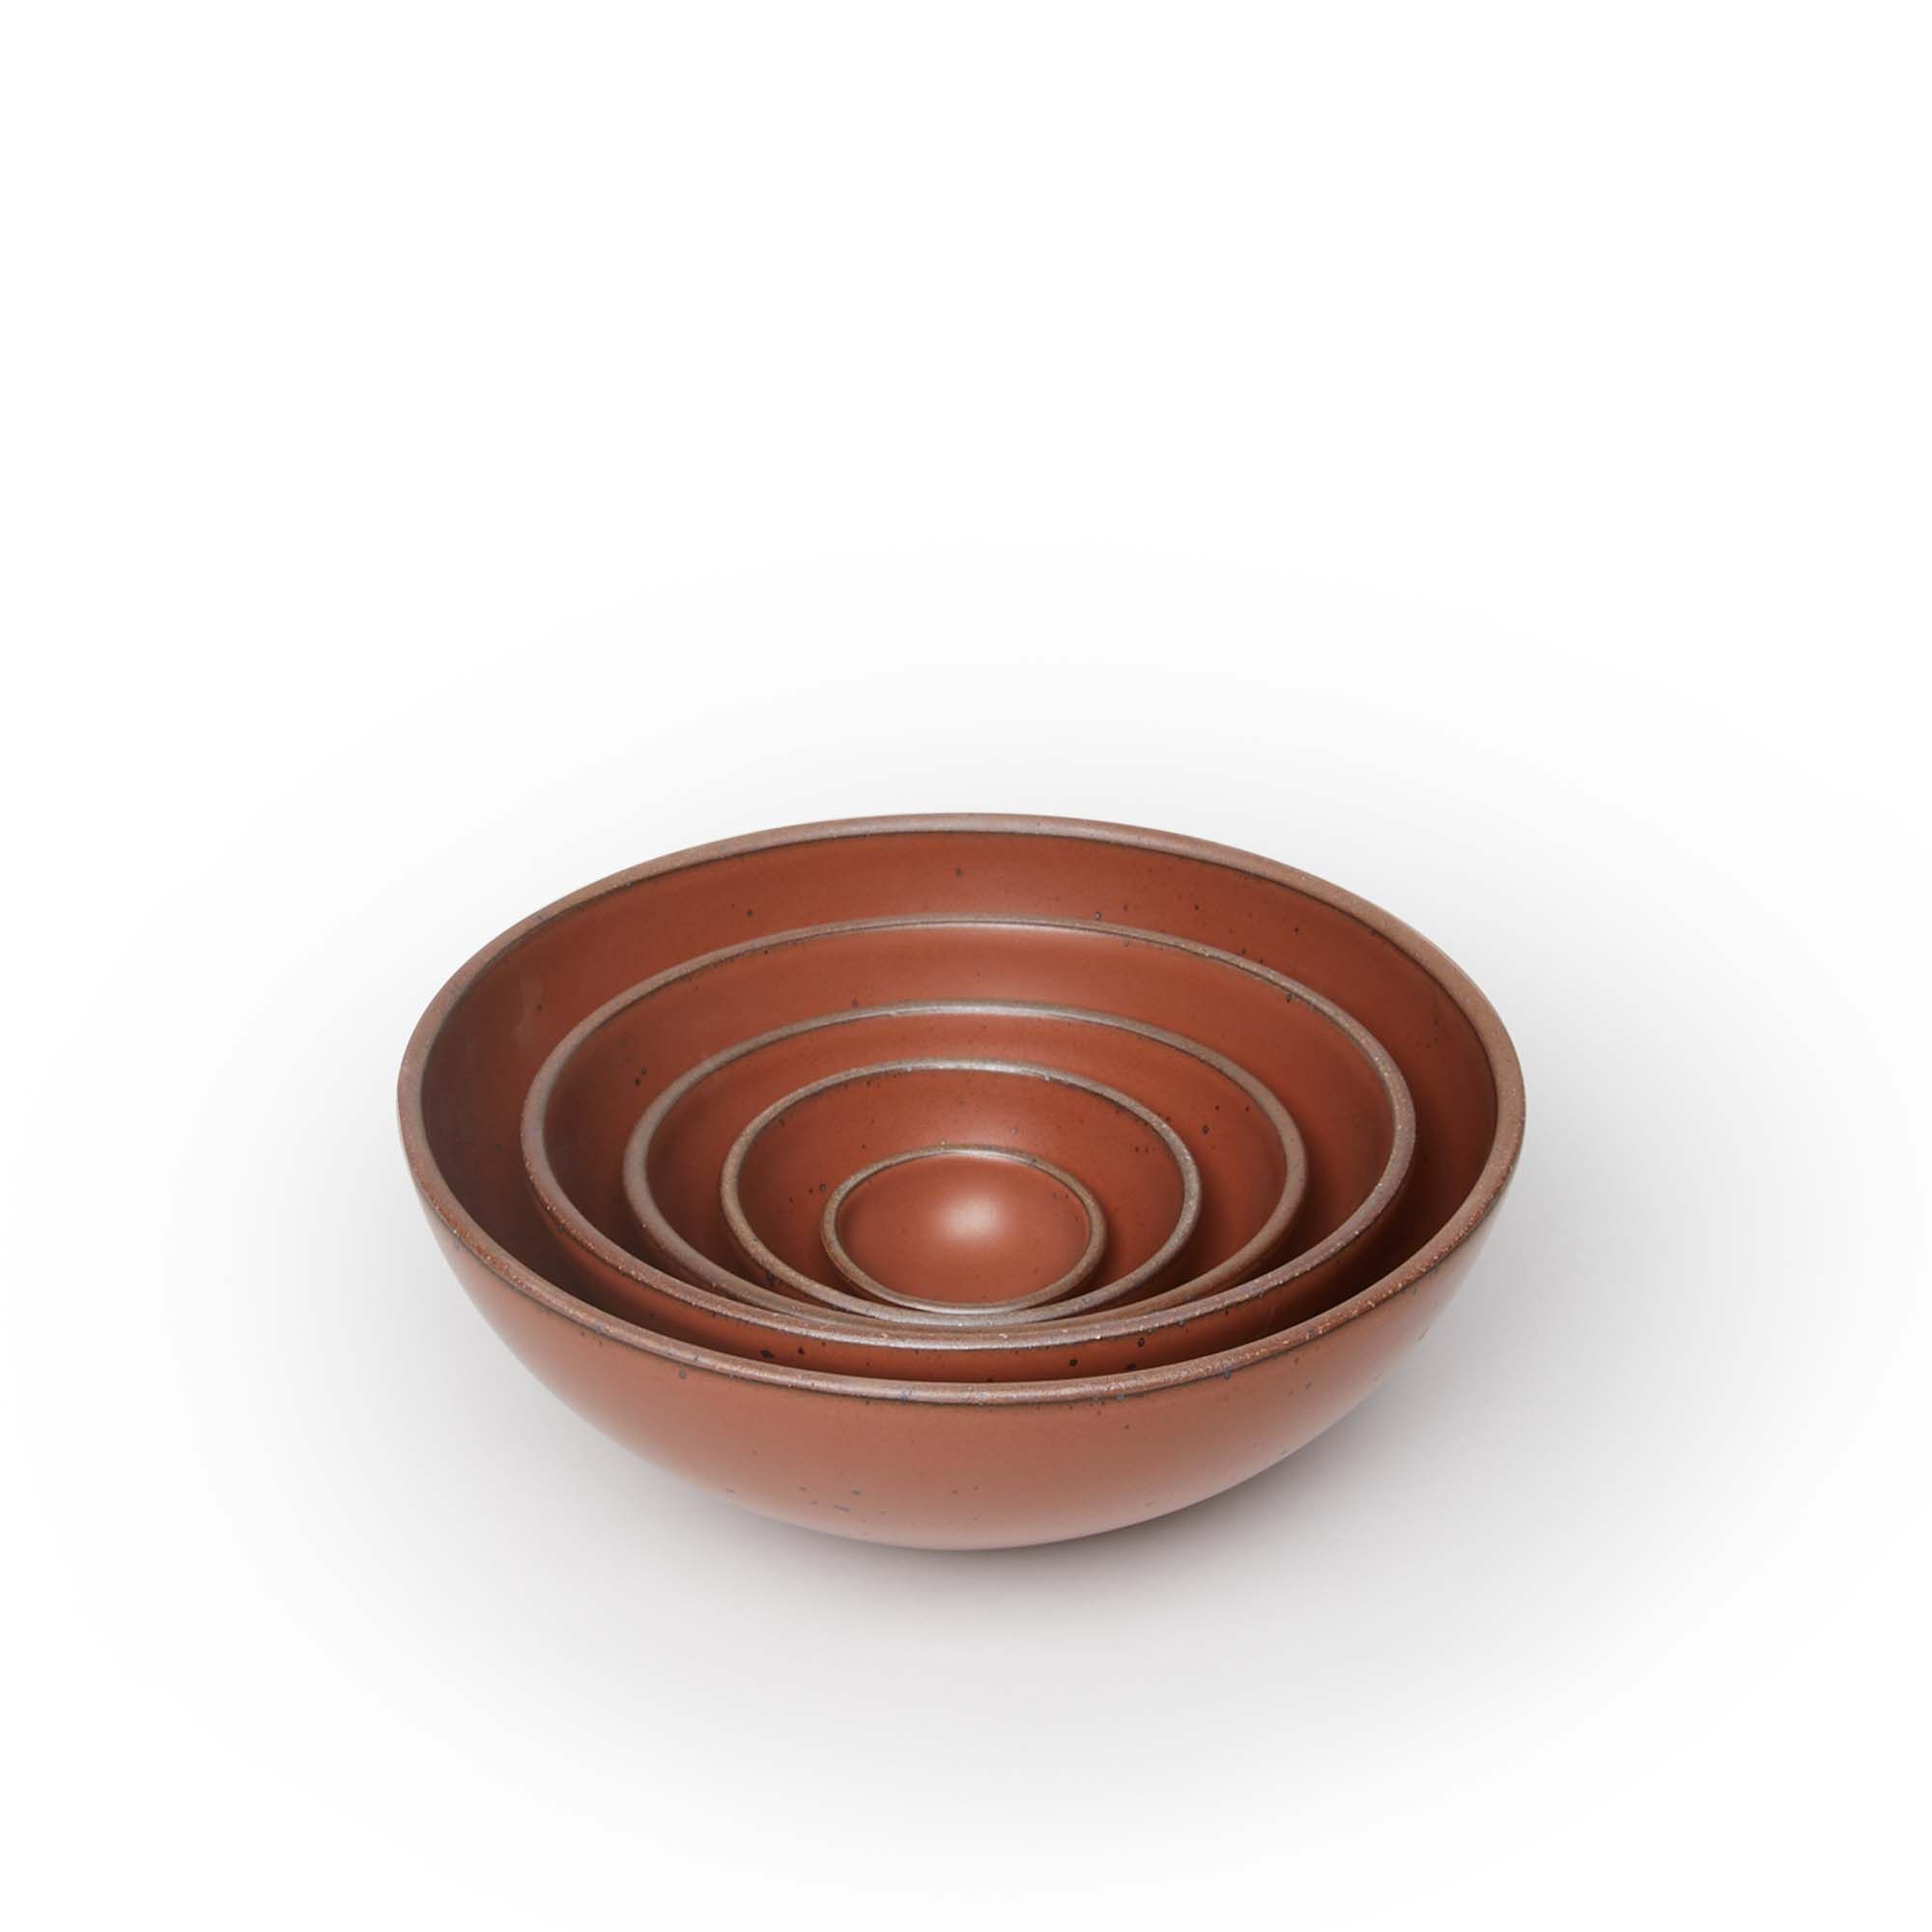 A bitty bowl, ice cream bowl, soup bowl, popcorn bowl, and mixing bowl paired together in a cool burnt terracotta color featuring iron speckles, nesting together